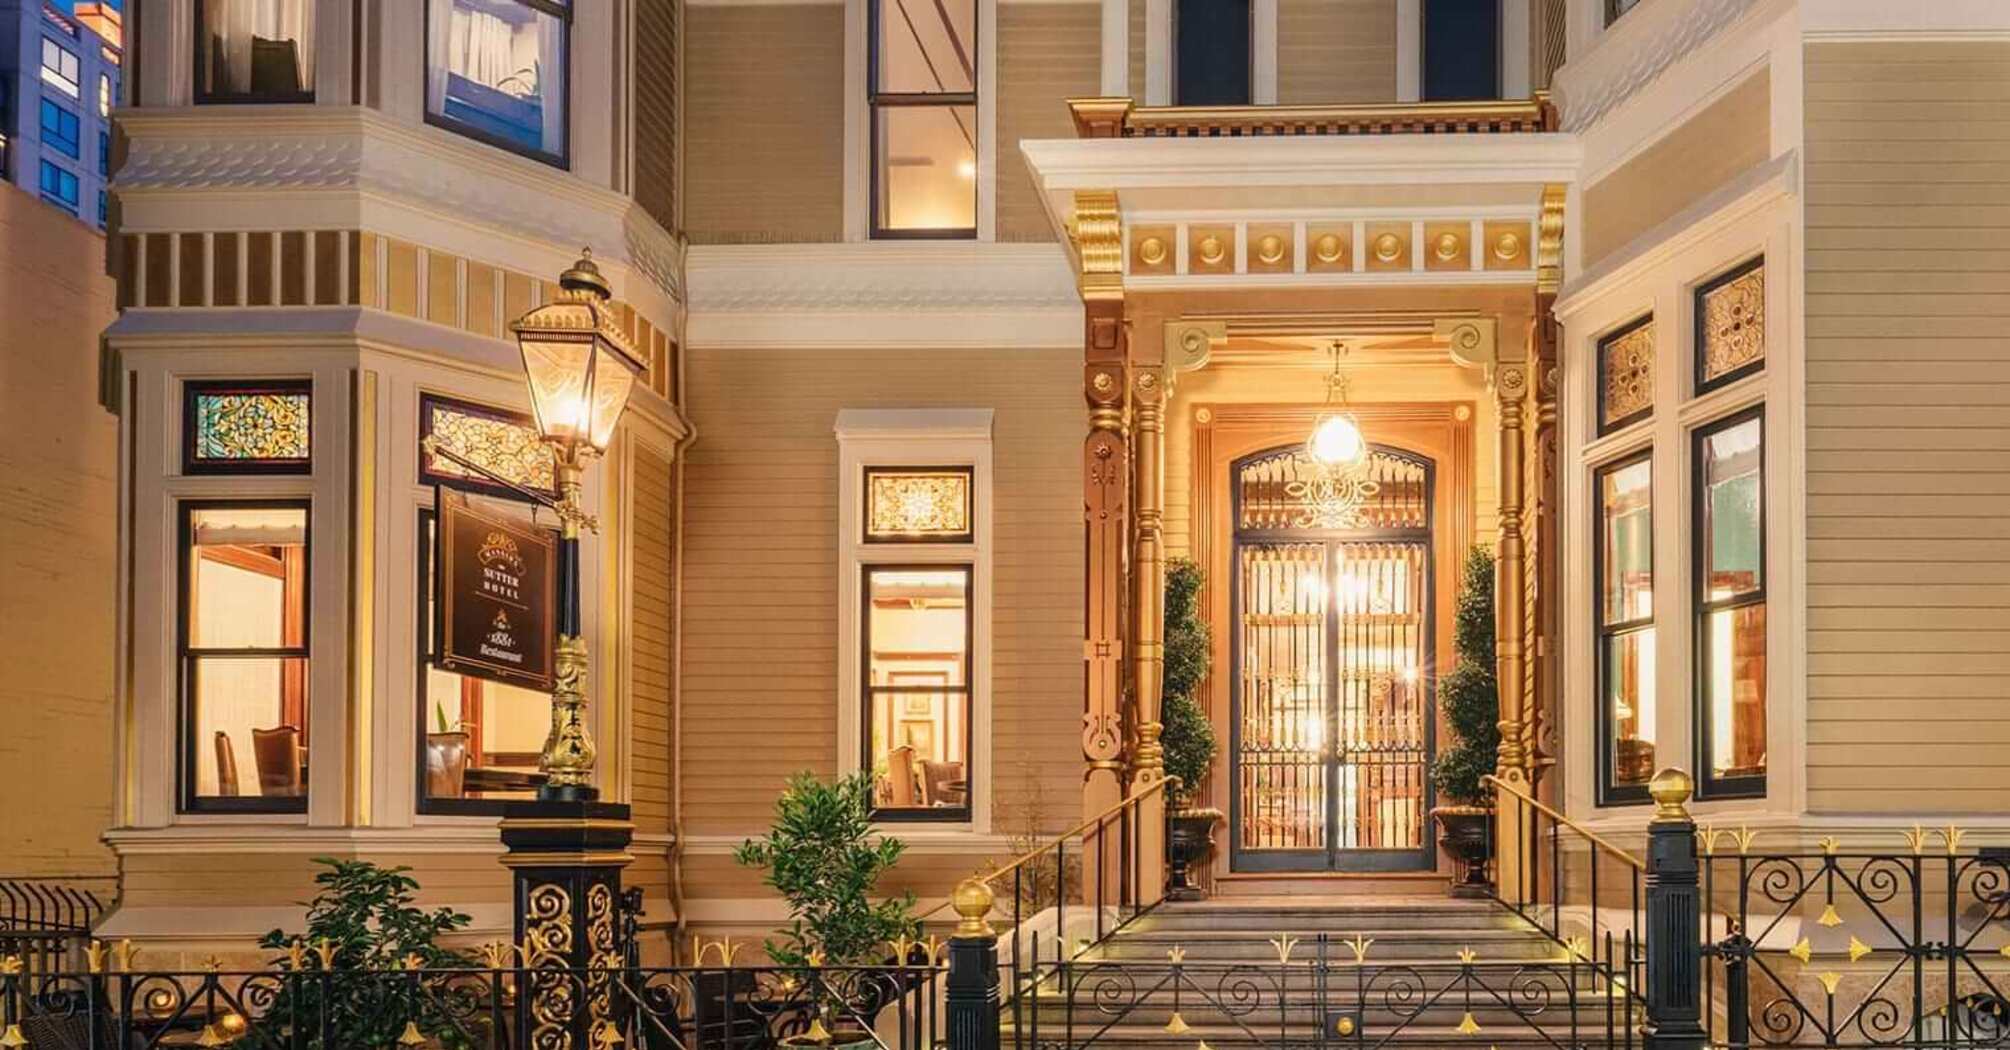 The top 8 boutique hotels in San Francisco for aesthetic enjoyment of the city and a staycation